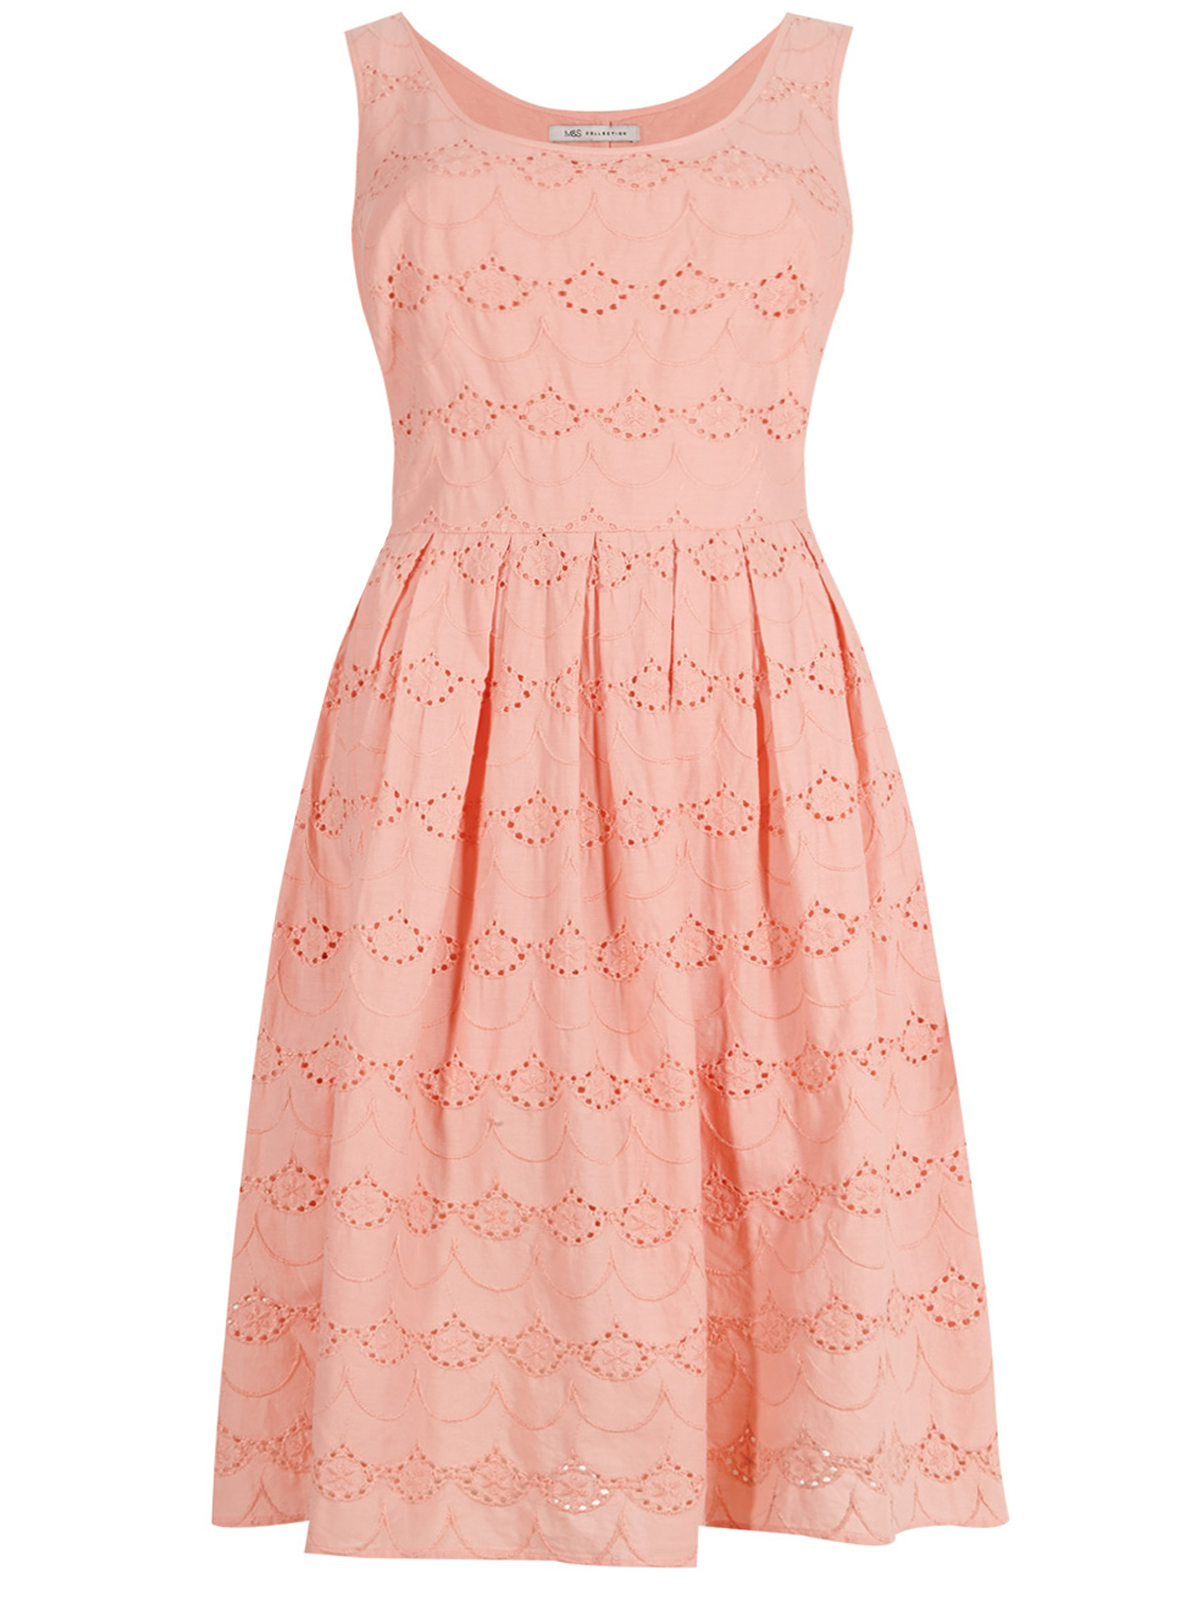 Marks and Spencer - - M&5 PEACH Pure Cotton Broderie Dress - Size 10 to 18